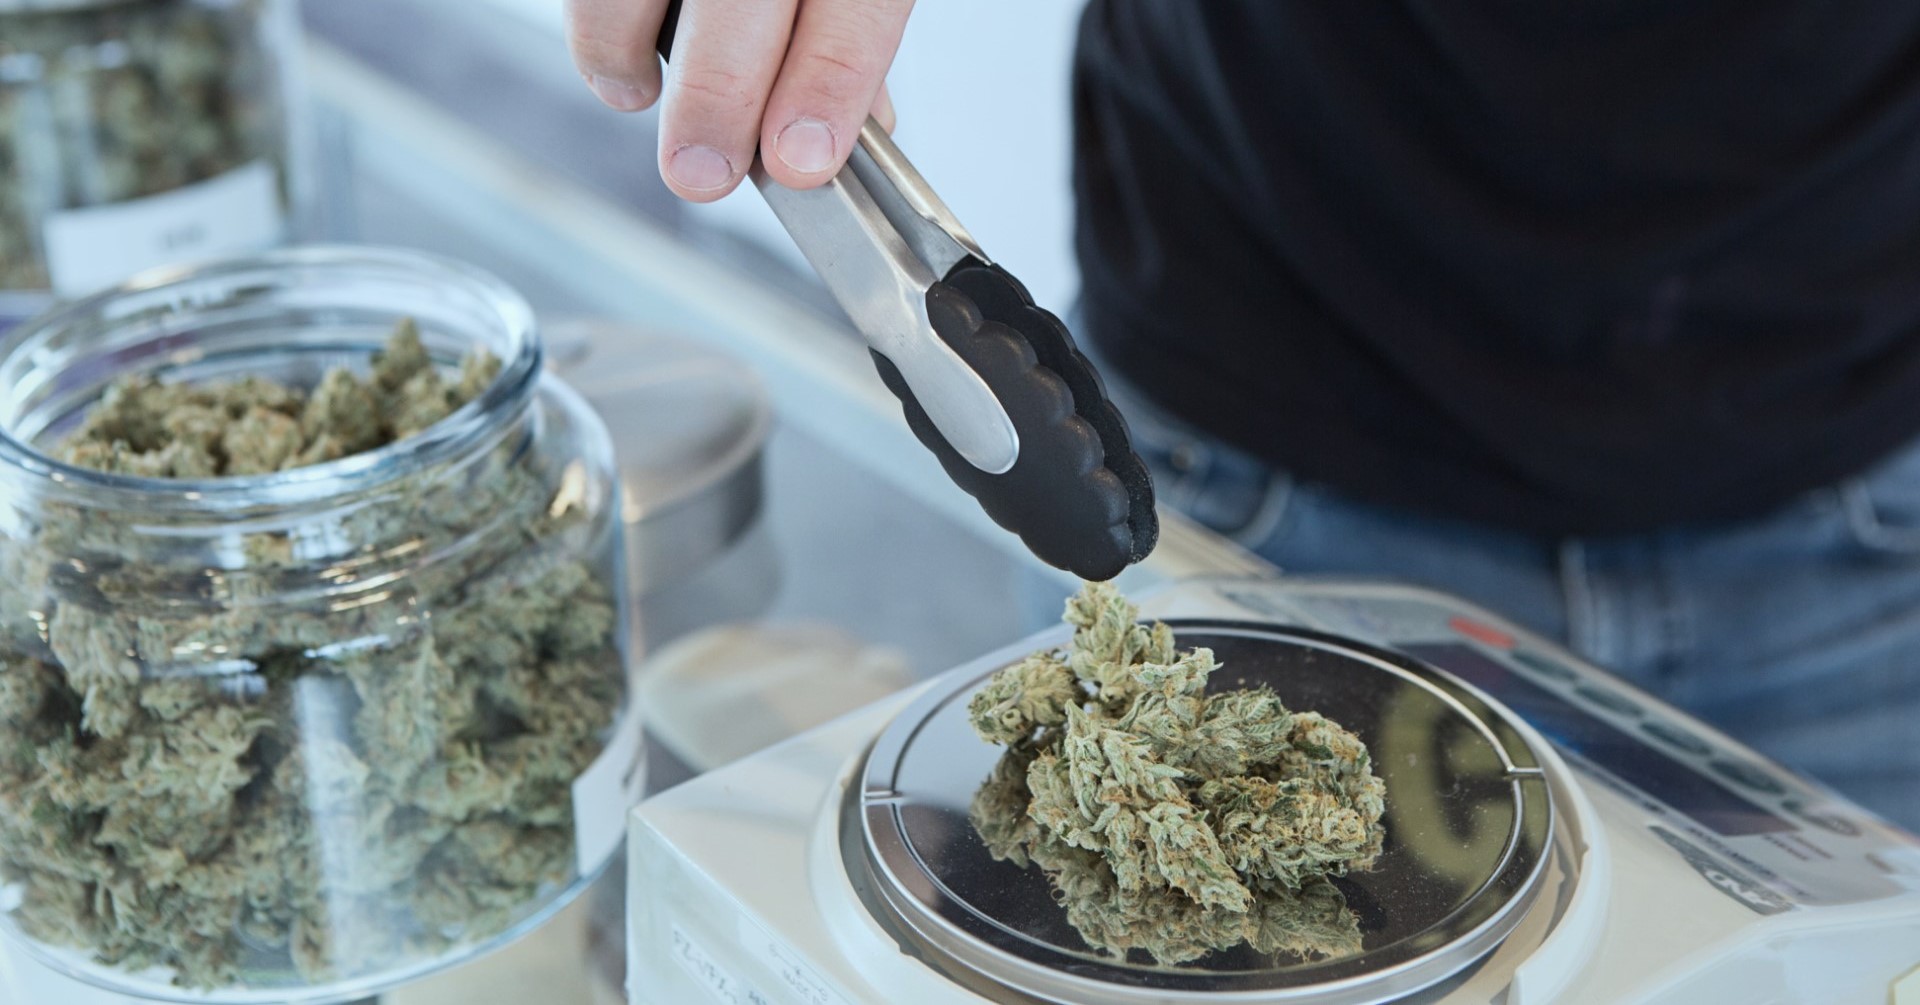 A person holding grey tongs and weighing kush